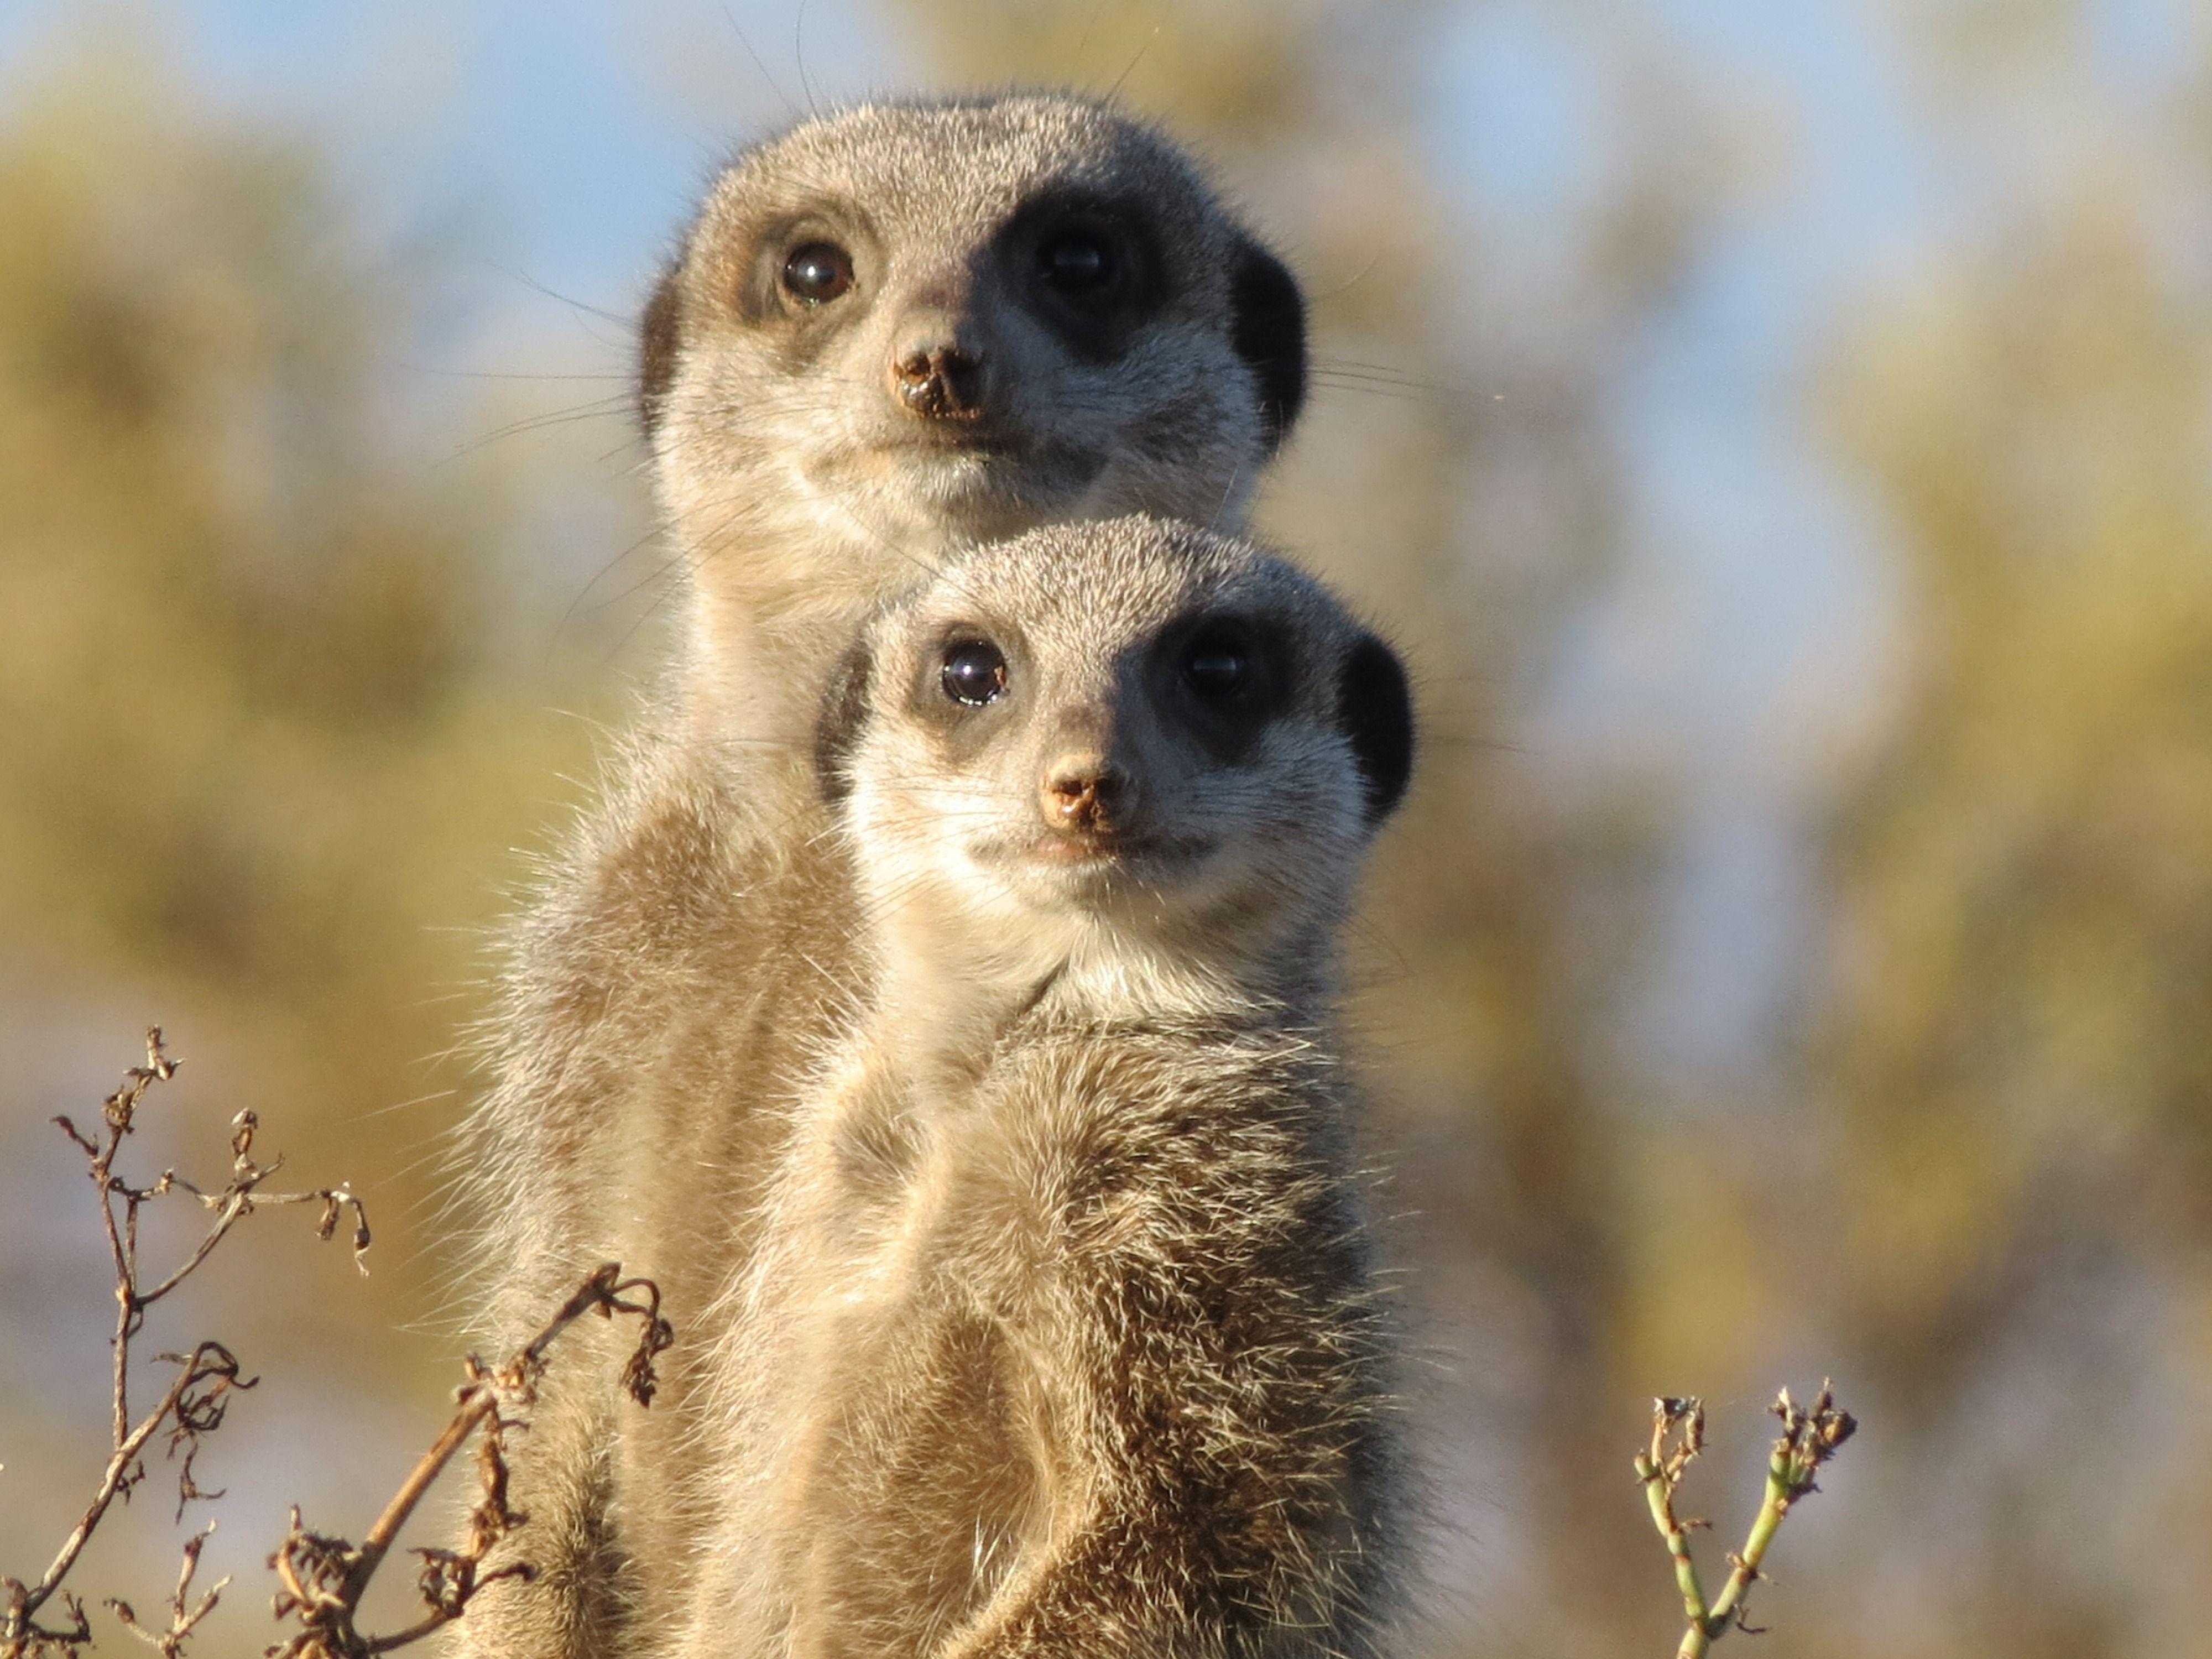 Wallpapers : animals, wildlife, couple, whiskers, mongoose, look